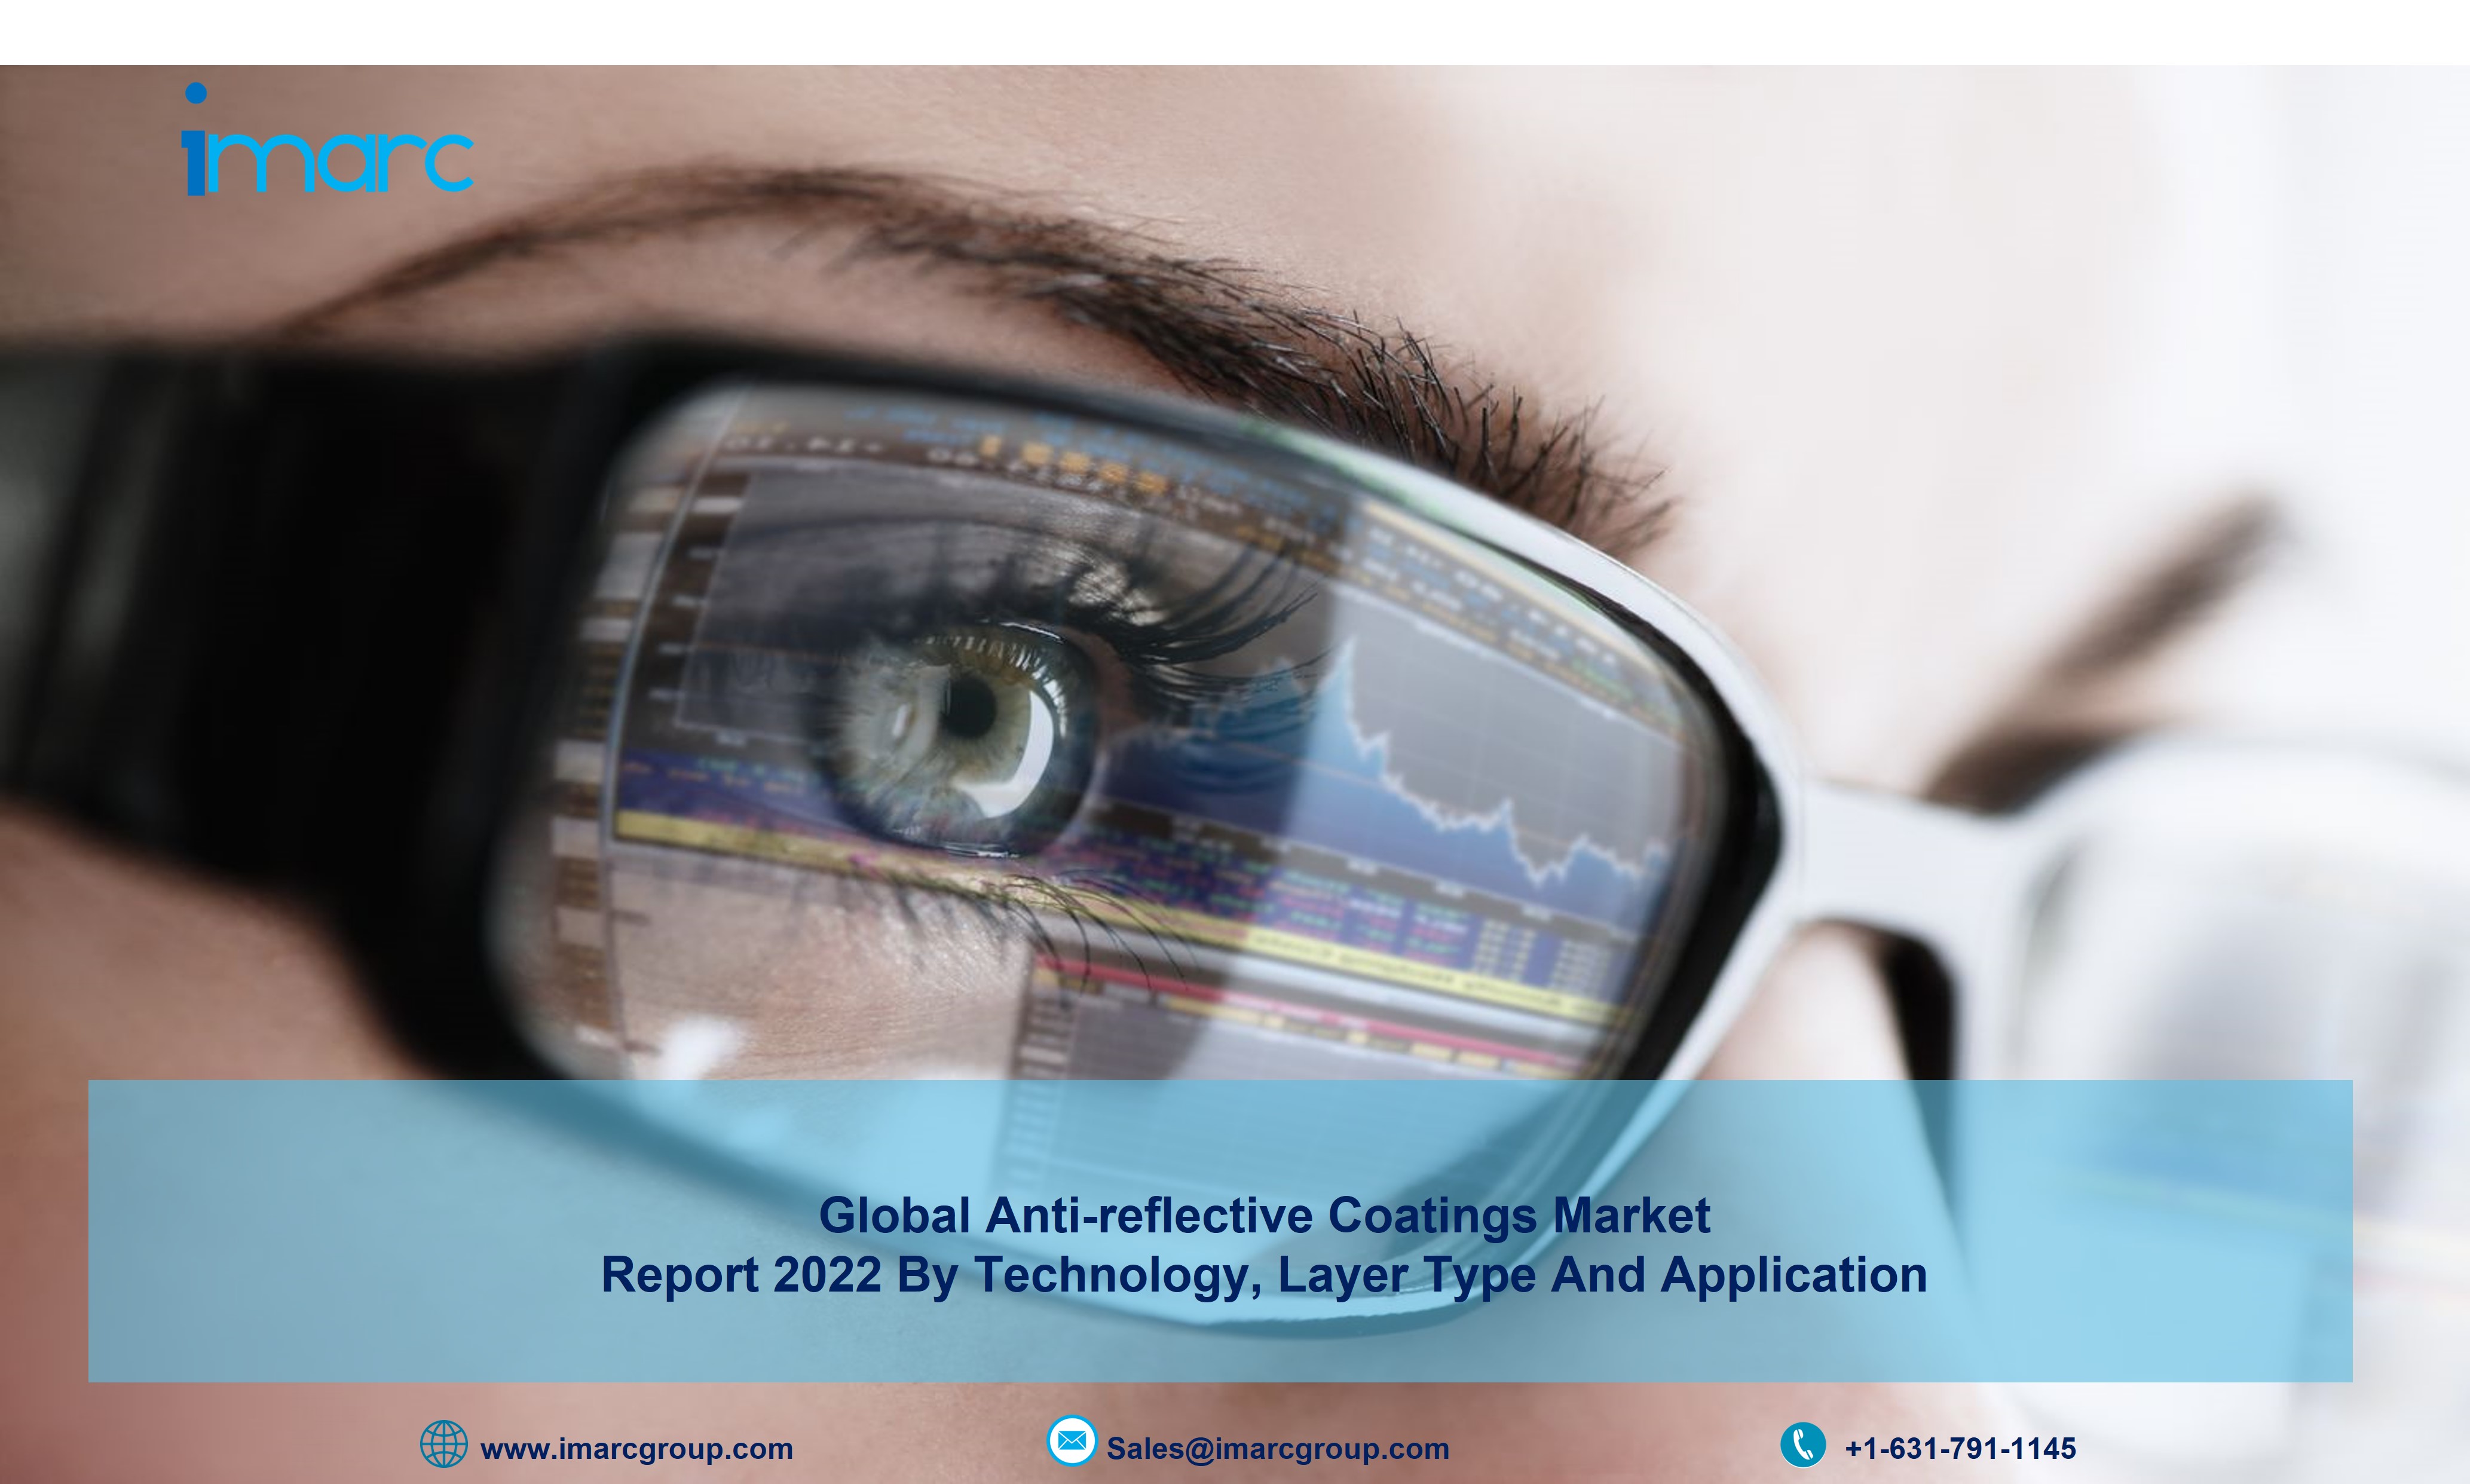 Anti-reflective Coatings Market Size 2022-2027 | Industry Overview, Share, Trends and Forecast